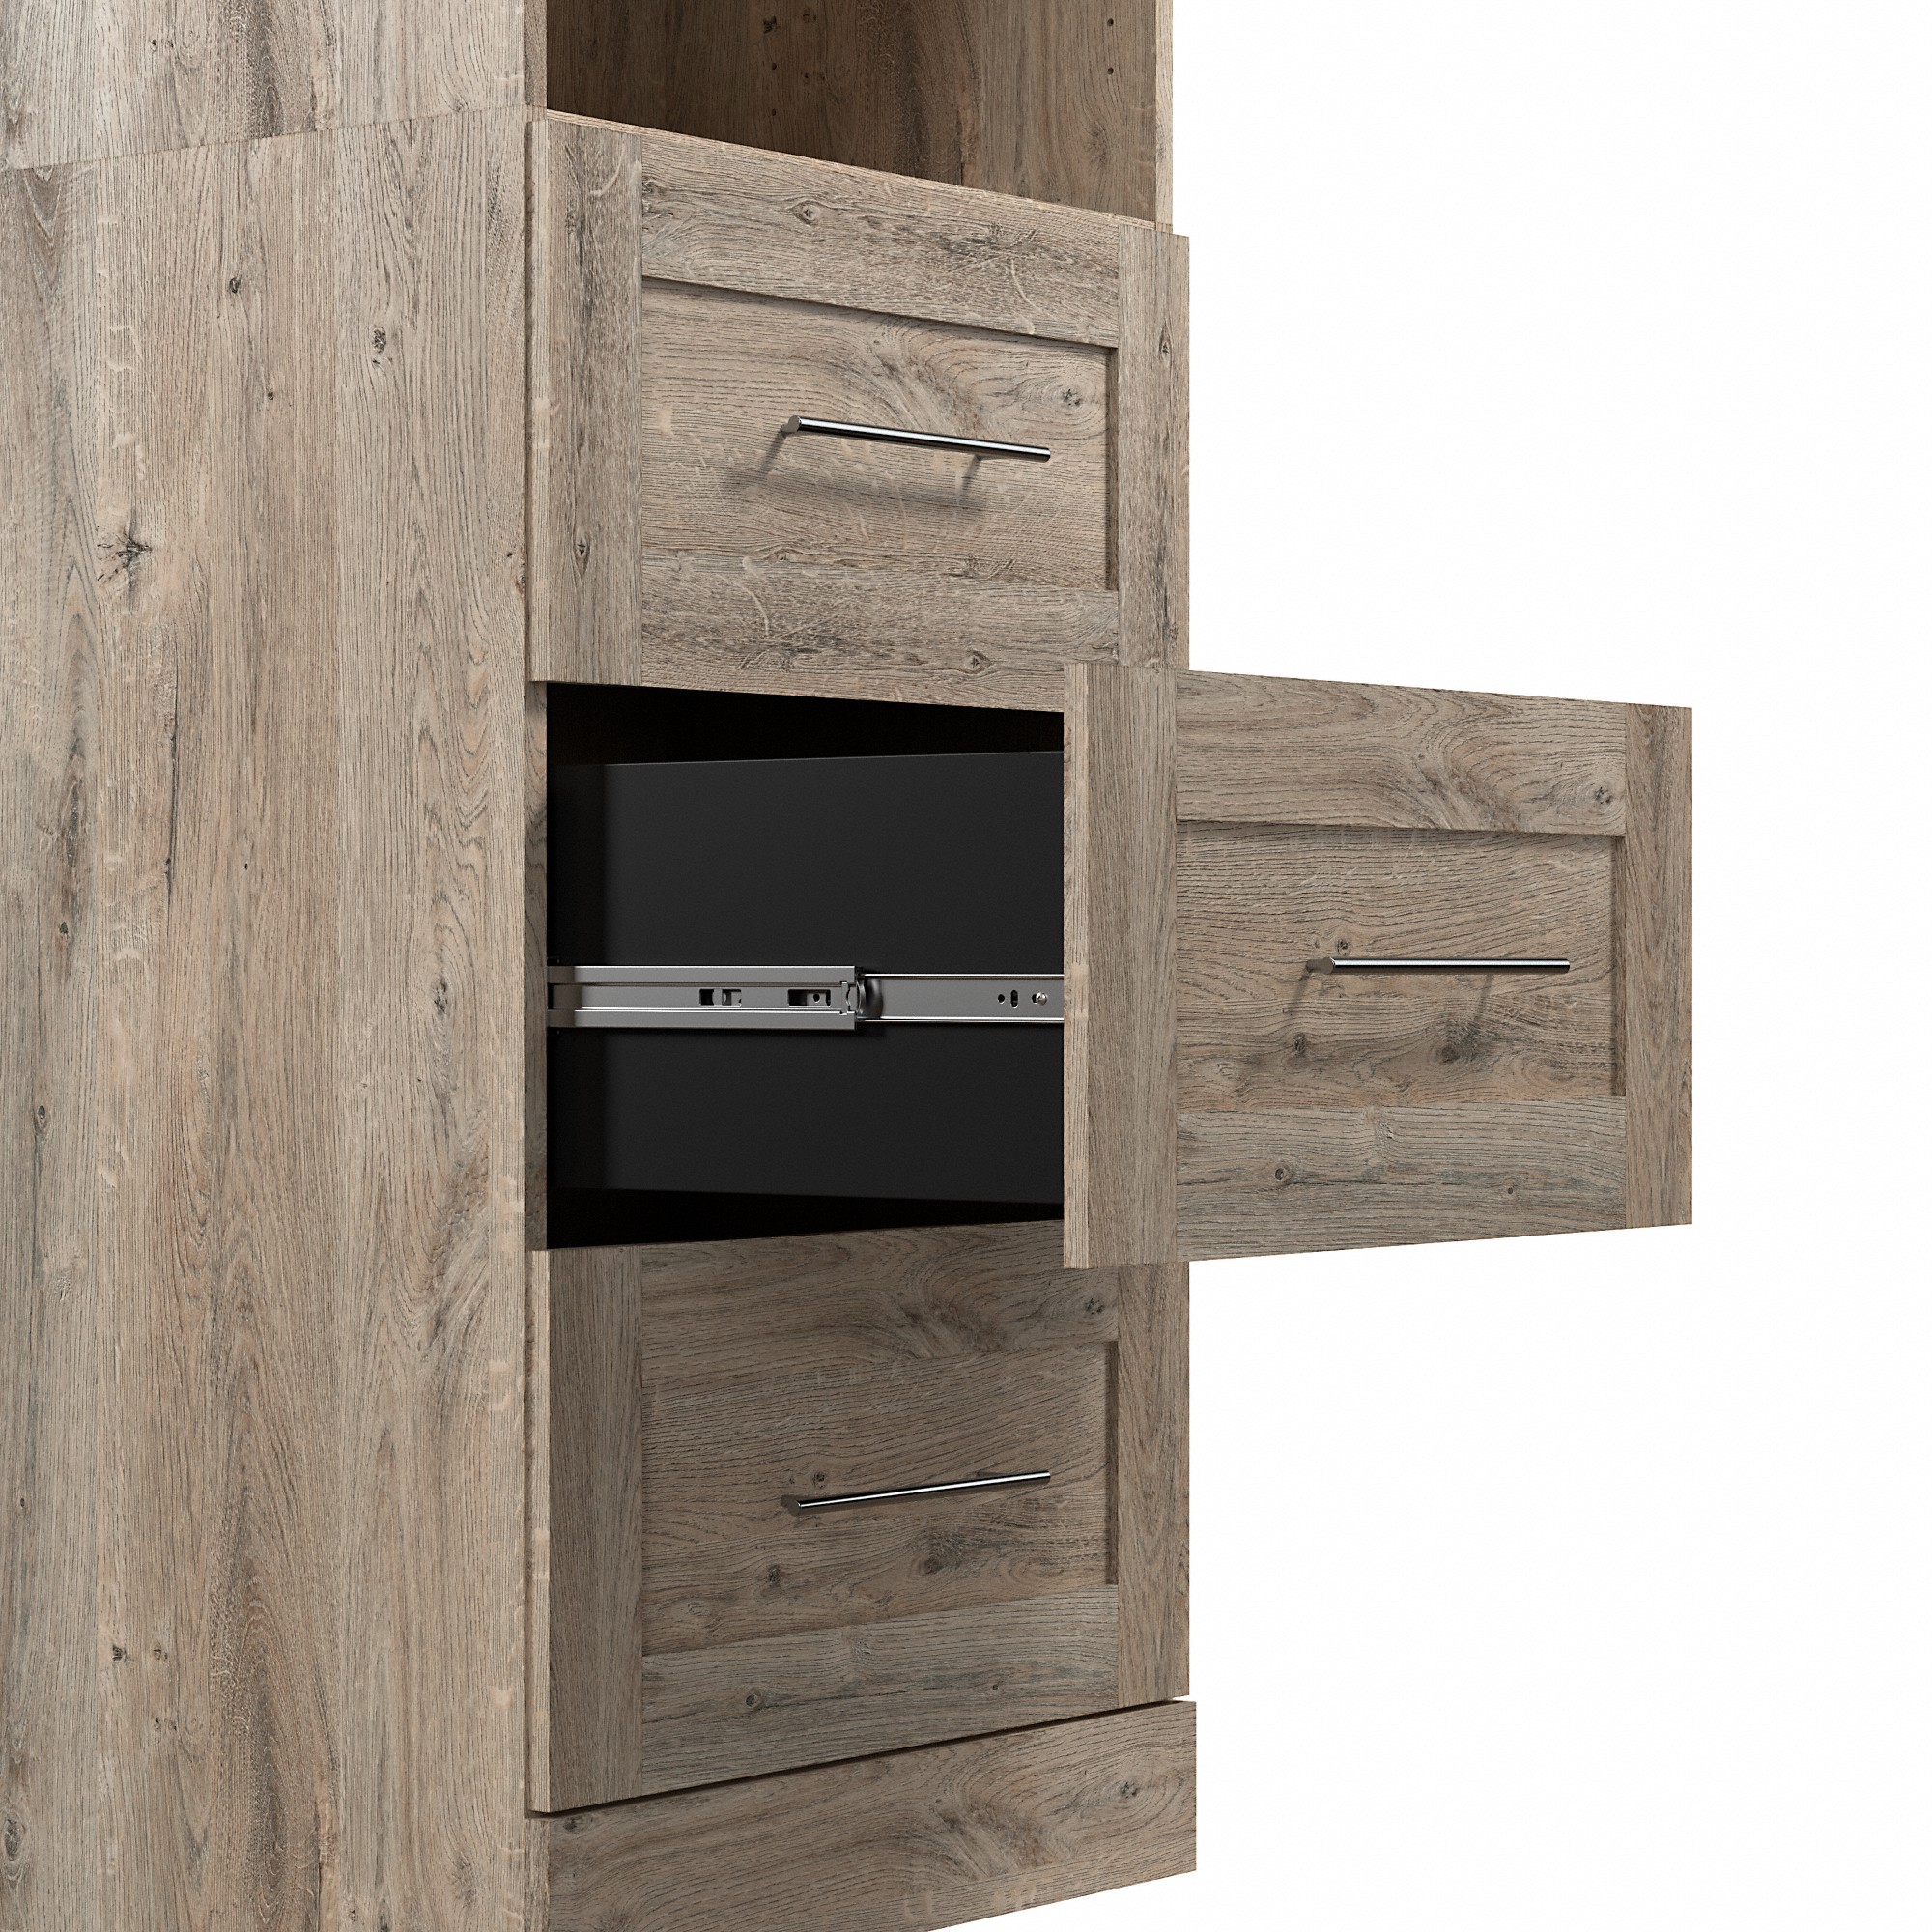 25W Wardrobe with Drawers in Rustic Brown by Bestar